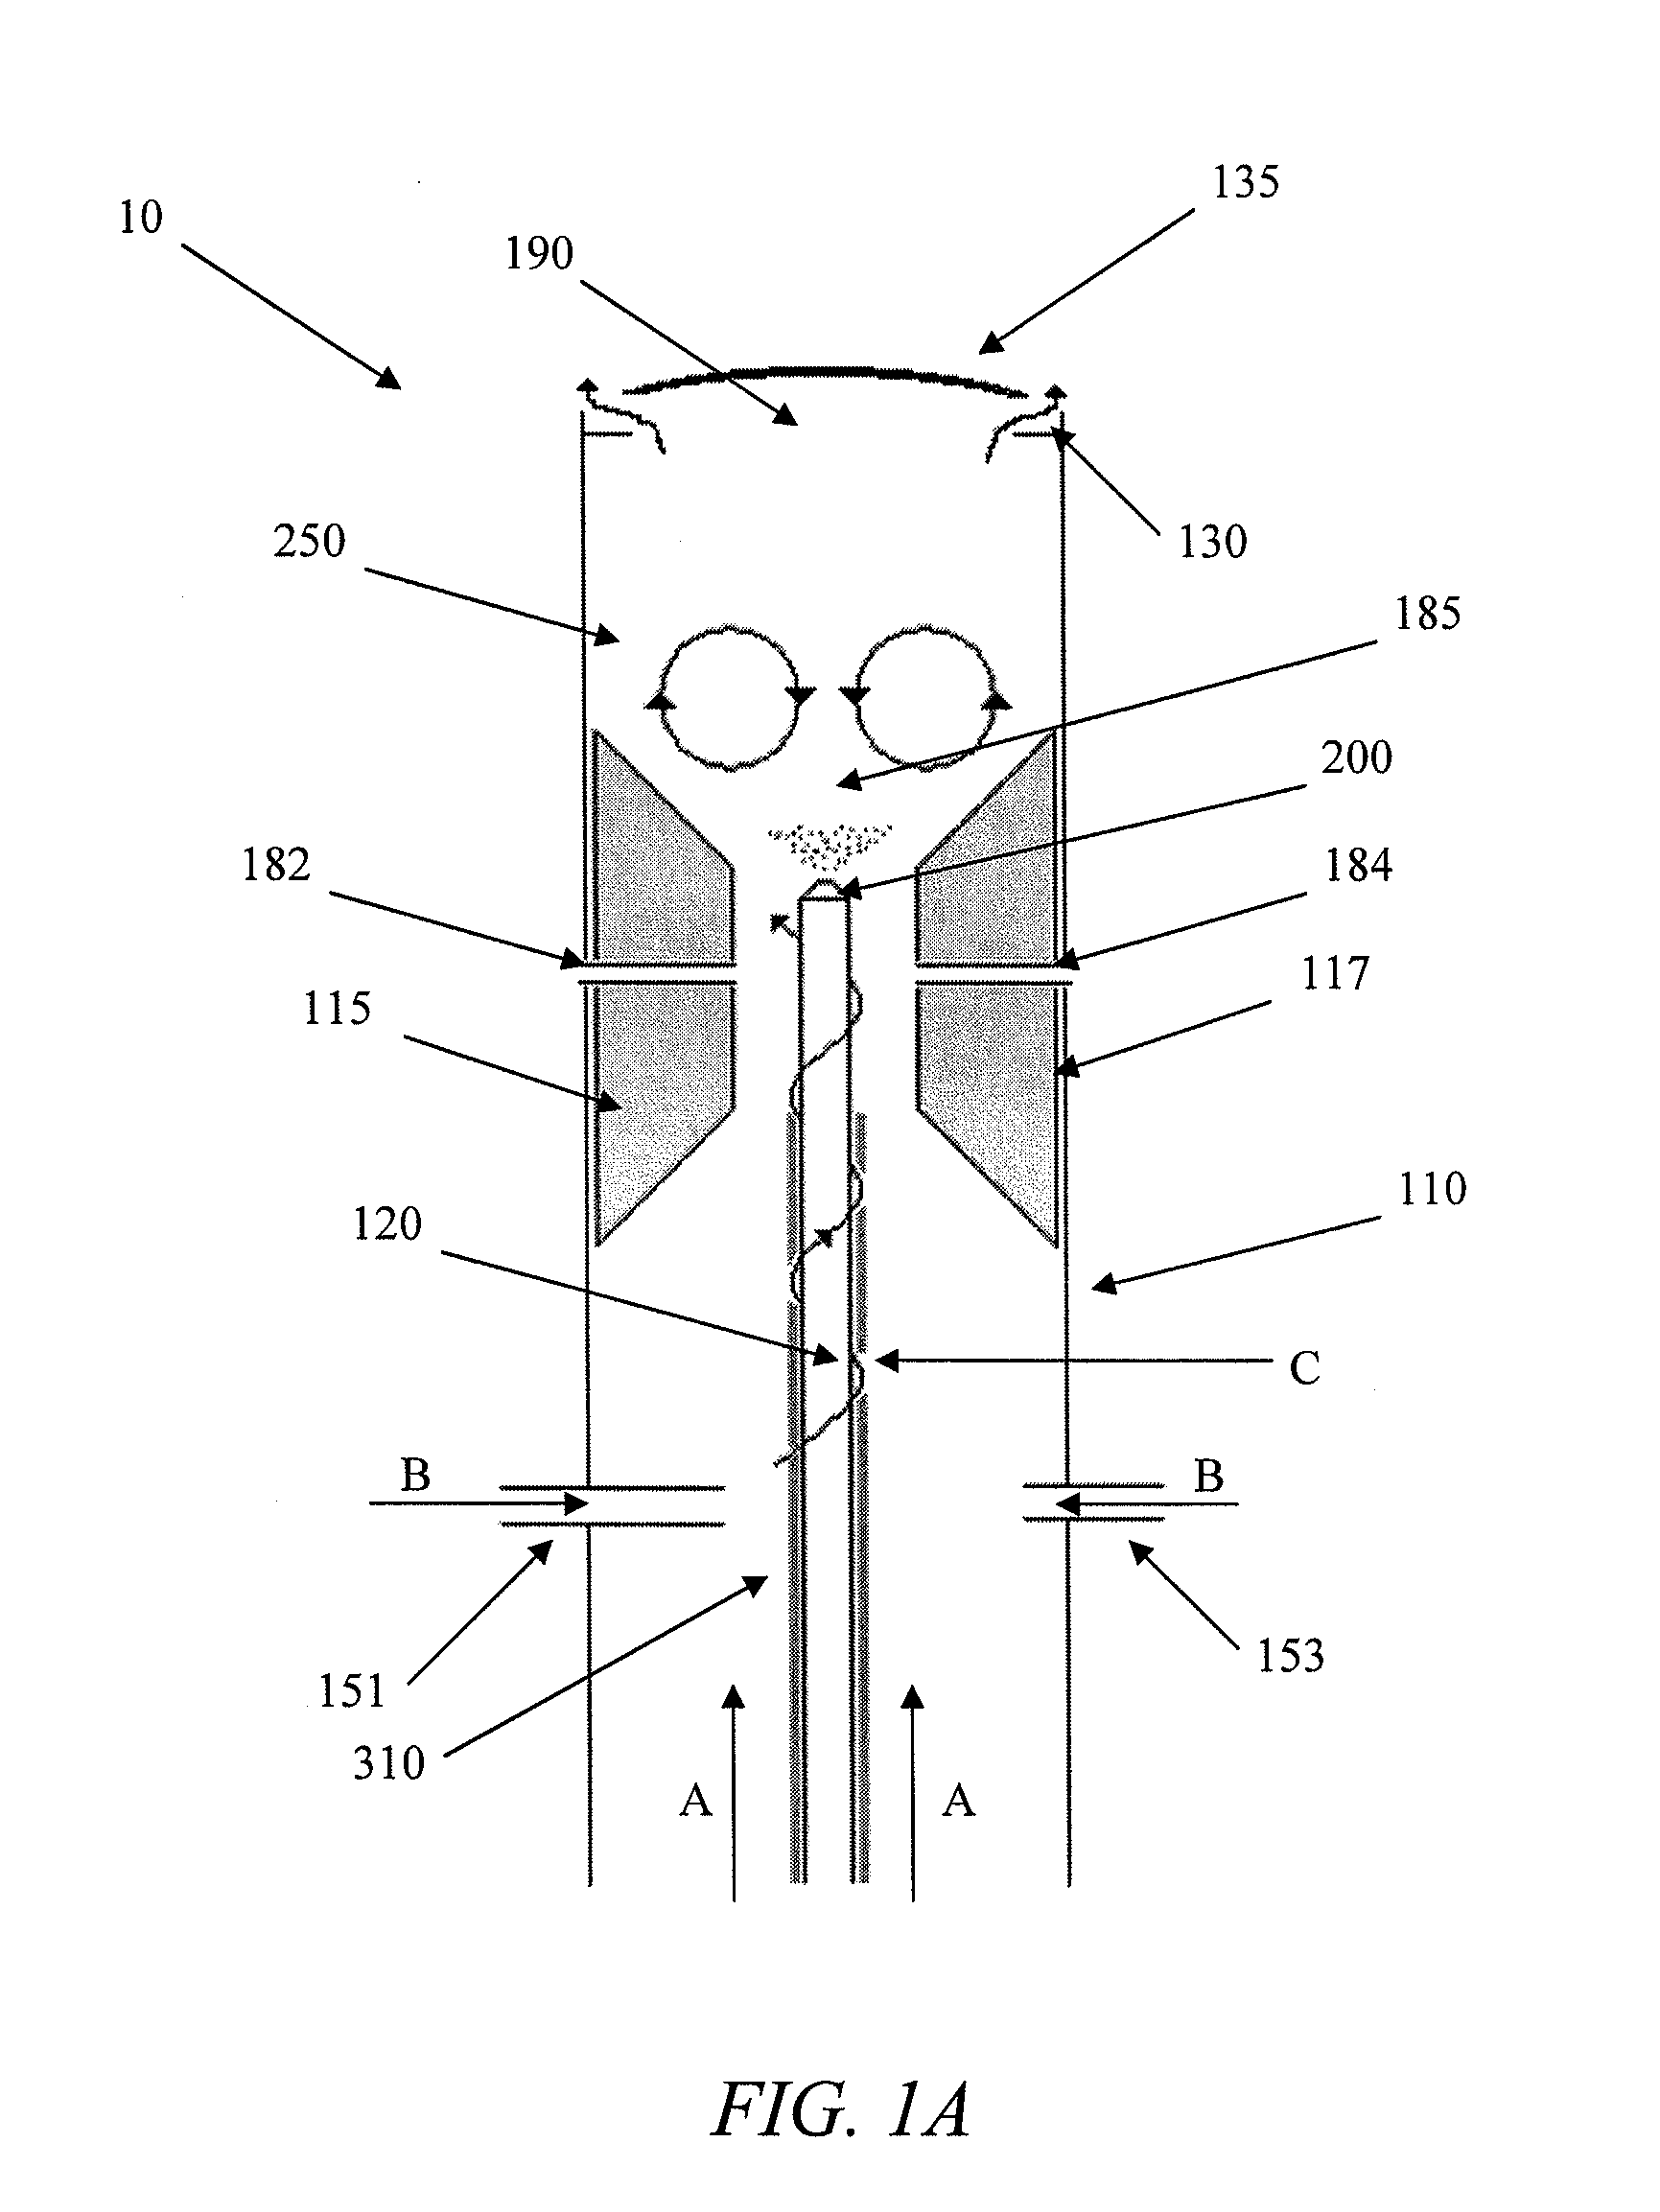 Process for combustion of high viscosity low heating value liquid fuels